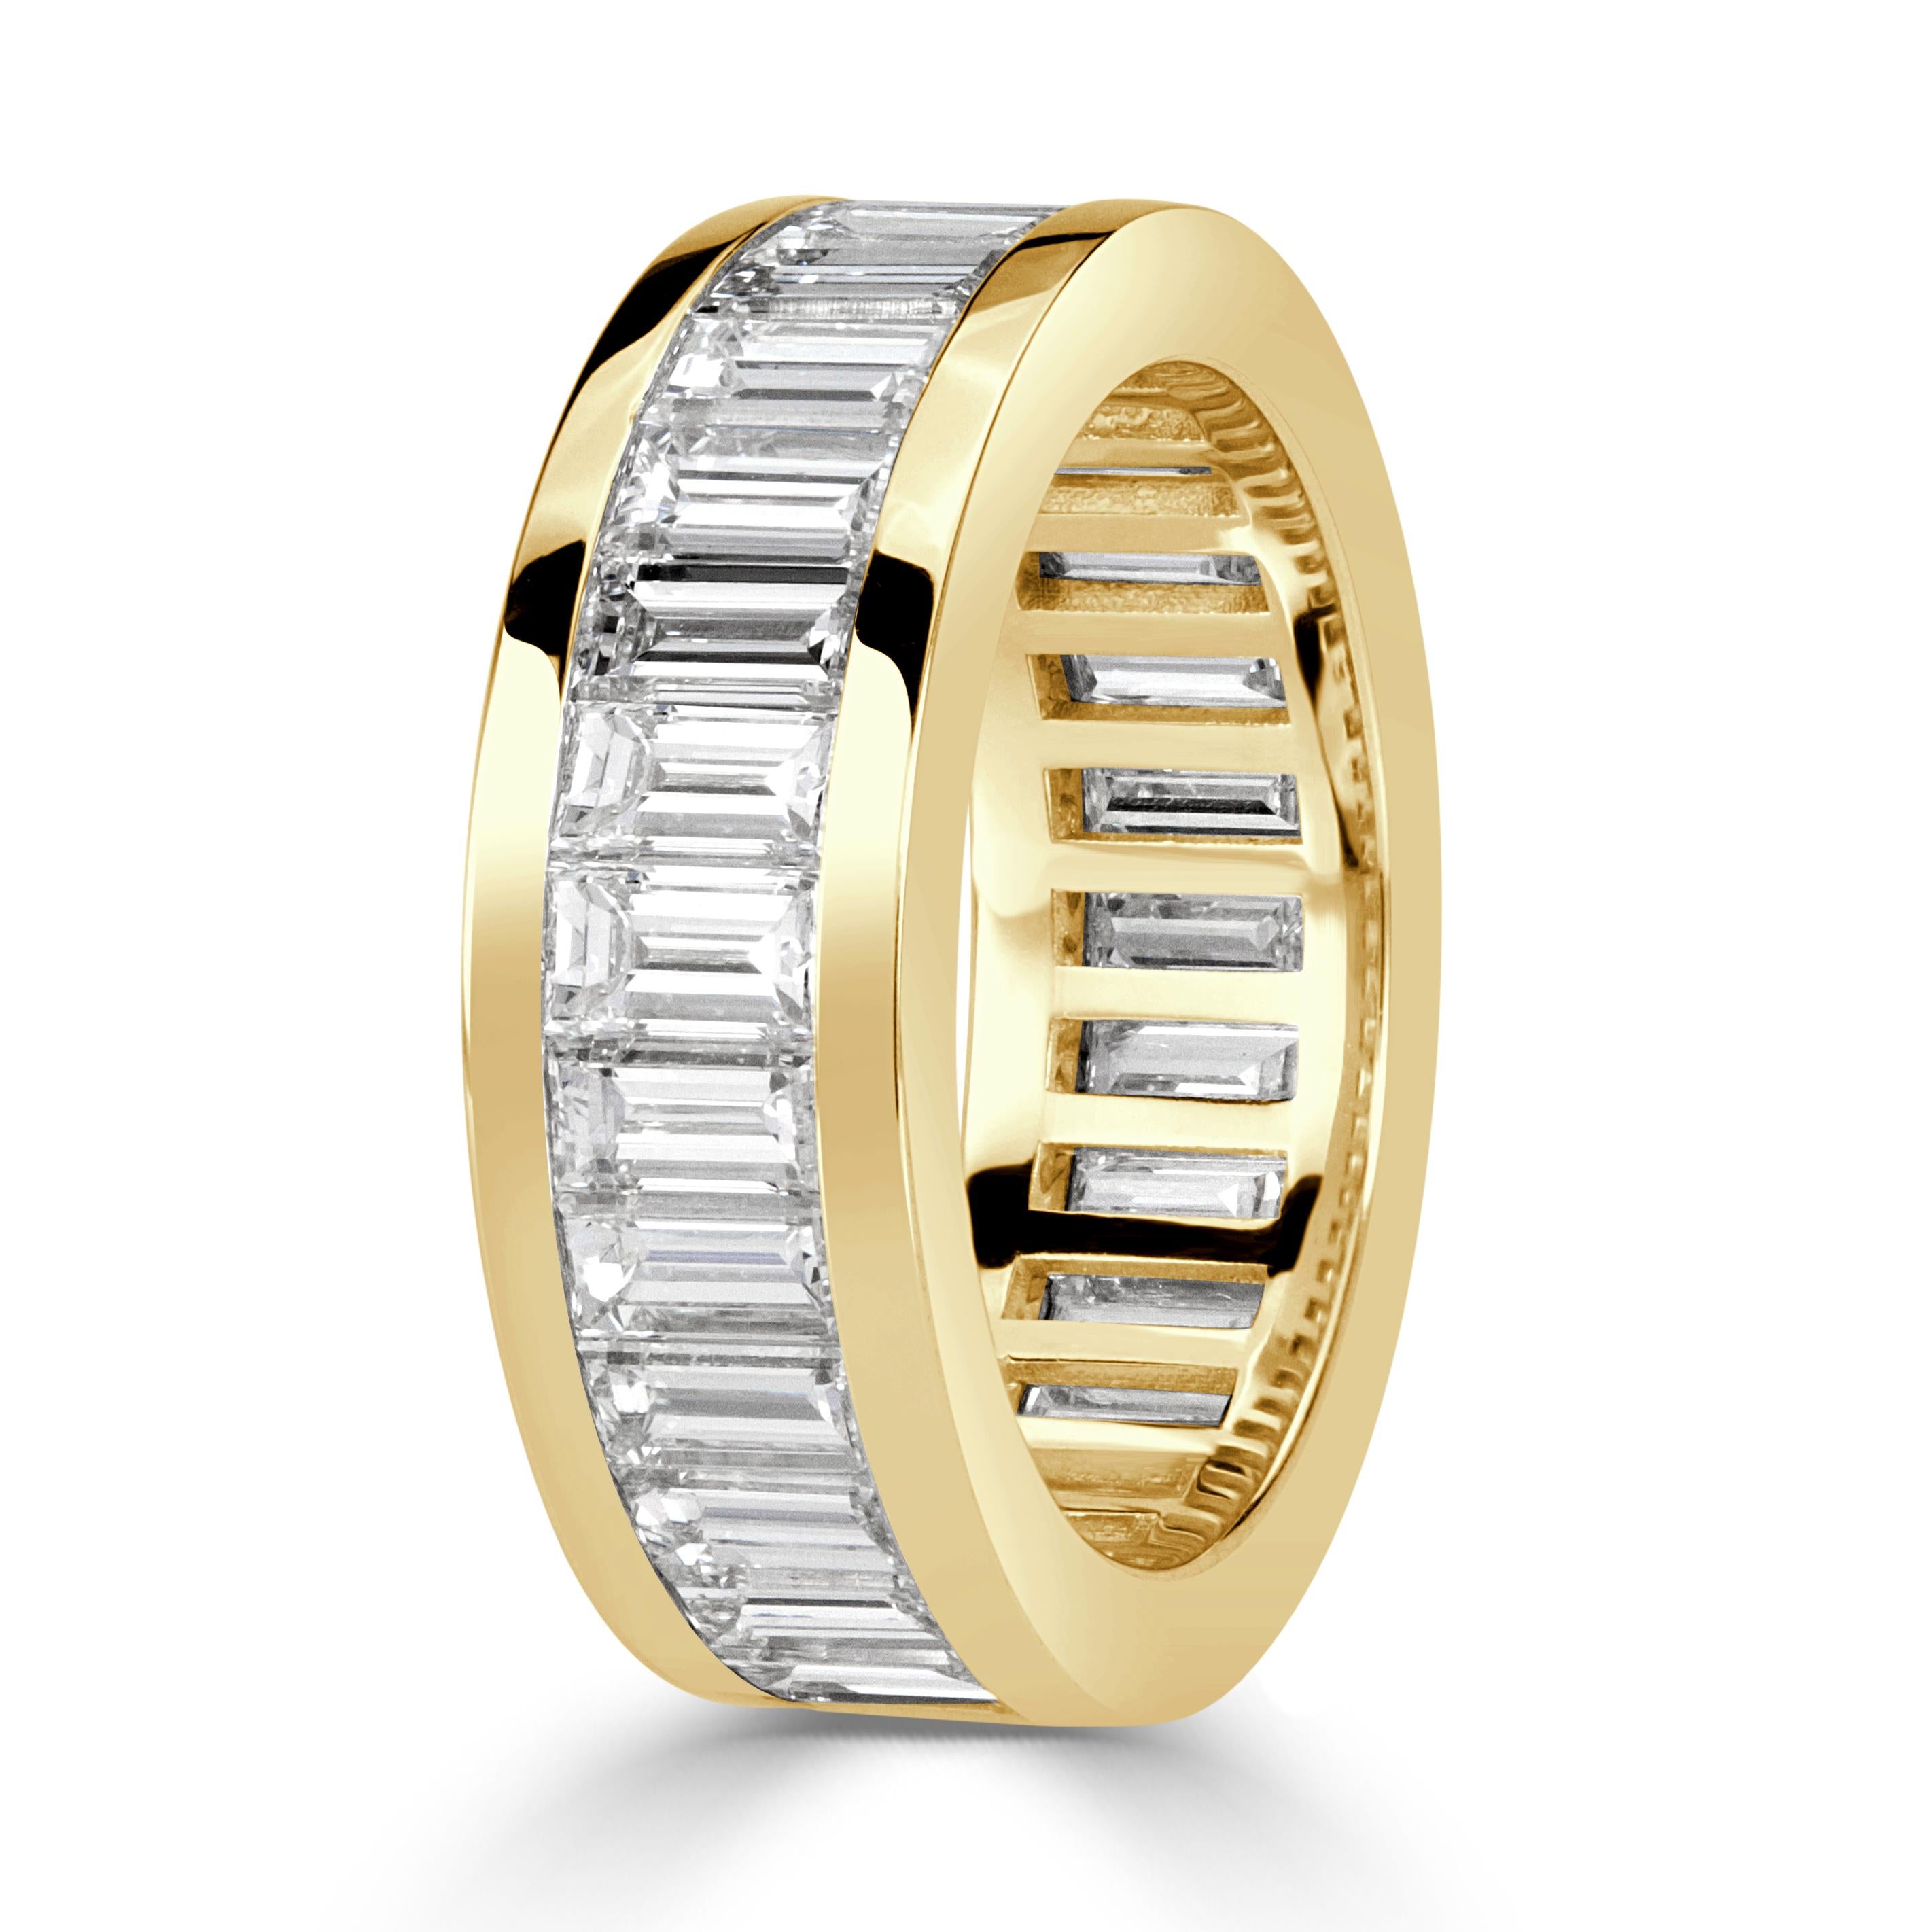 This stunning diamond eternity band showcases 4.97ct of baguette cut diamonds channel set to perfection in 18k yellow gold. Thay are graded at premium qualities of F-G in color, VVS2-VS1 in clarity. Absolutely perfect to wear as a stand alone piece